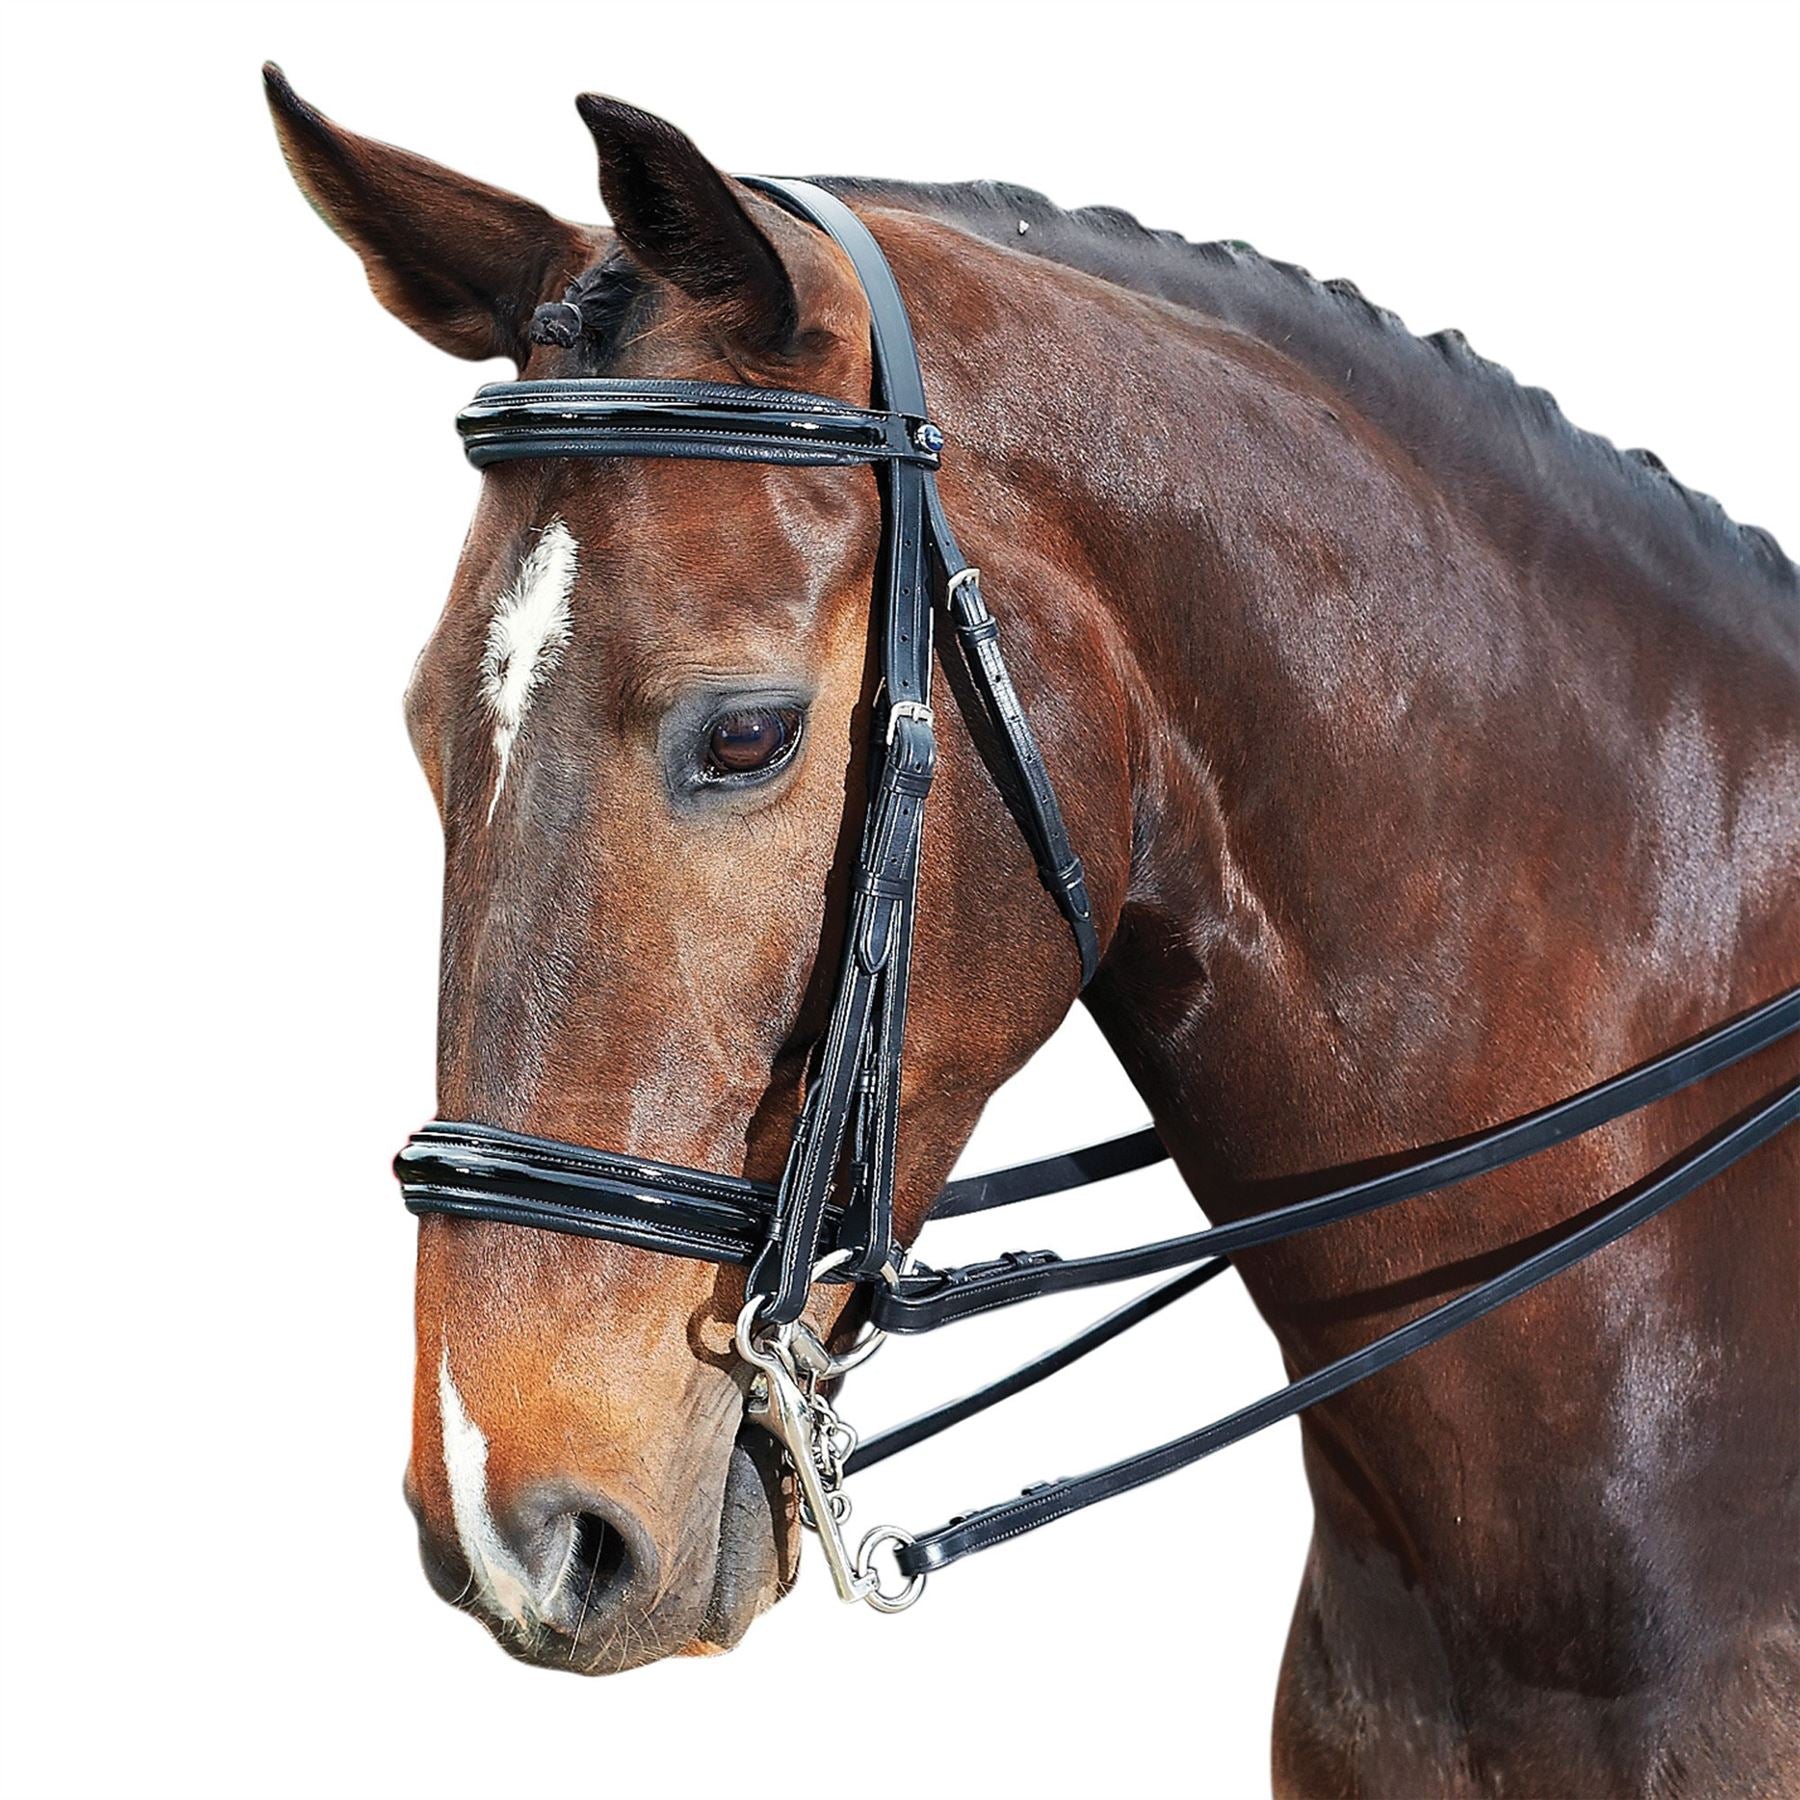 Collegiate Raised Weymouth Bridle - Just Horse Riders